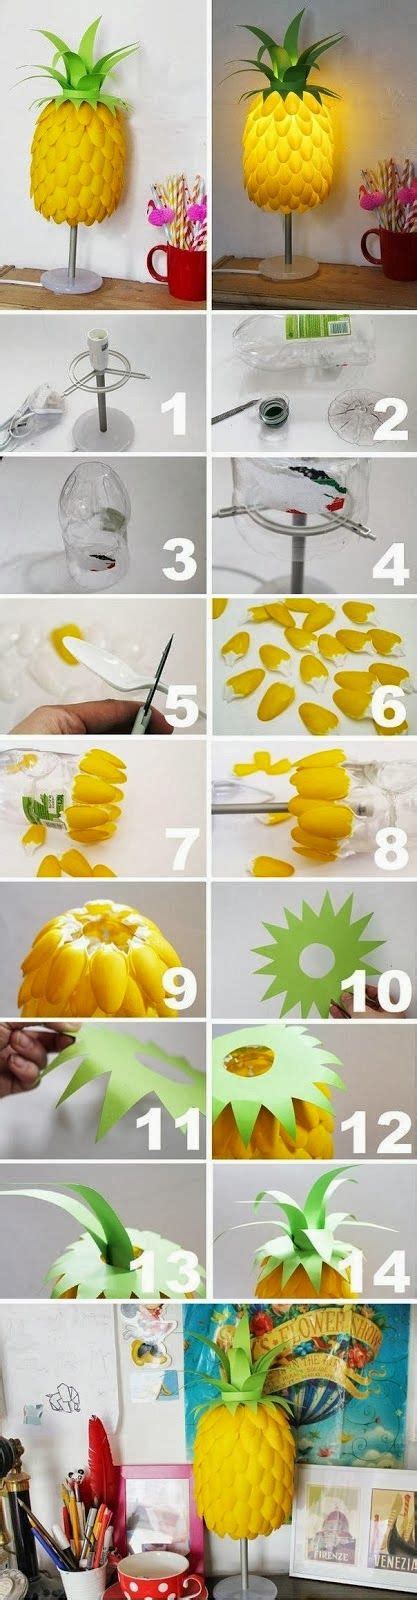 Amazing Diy Plastic Spoon Crafts That Will Fascinate You Ideas To Love